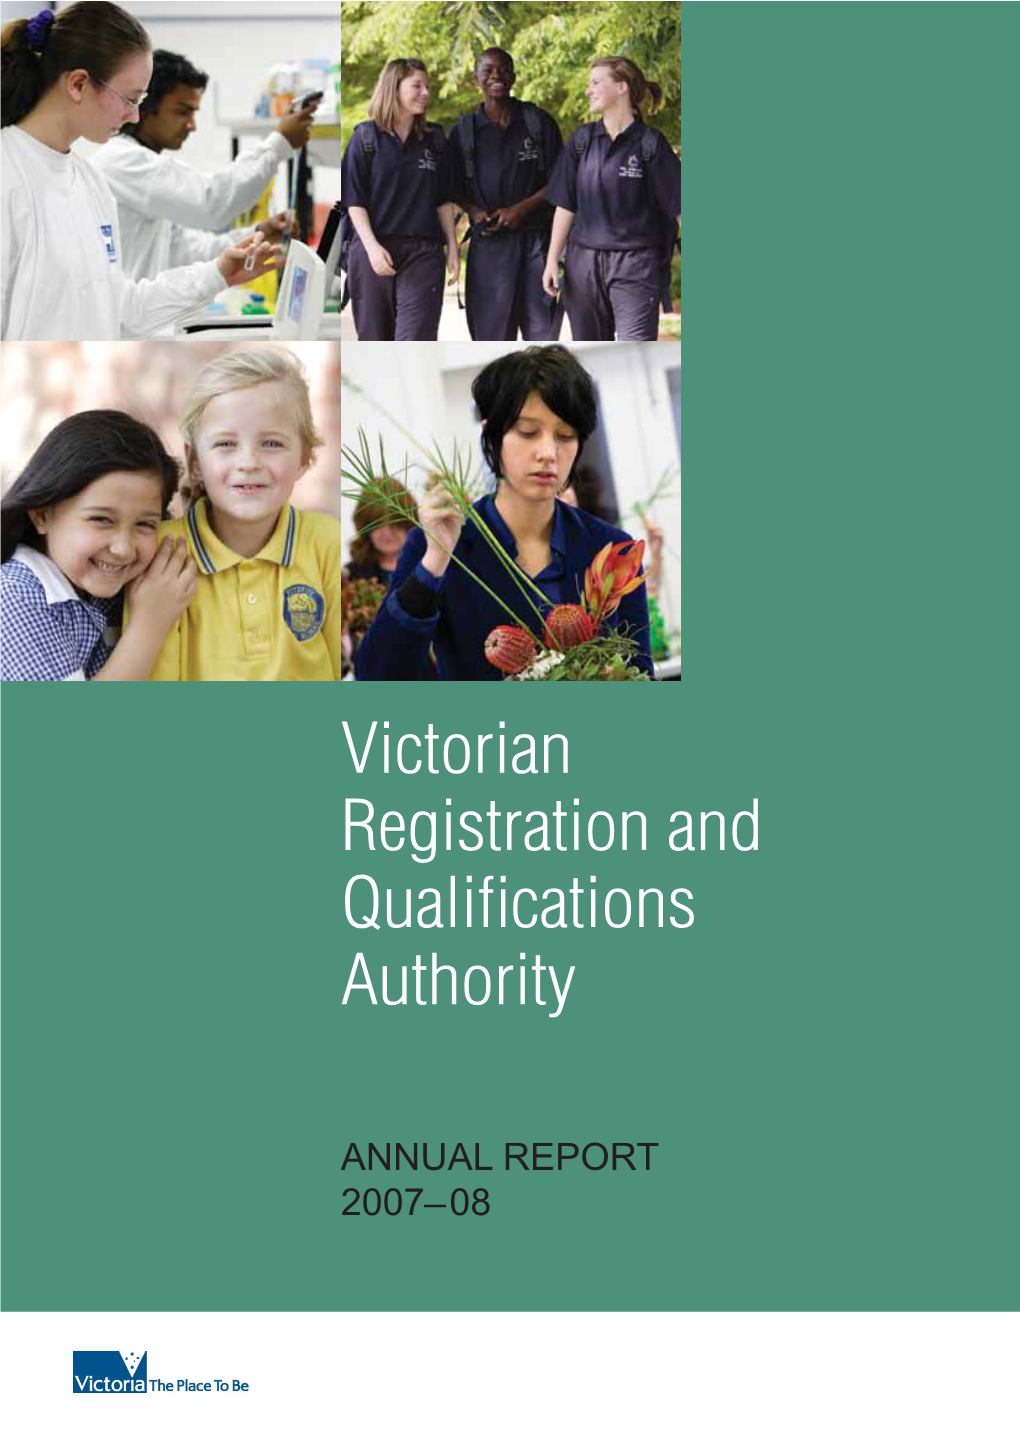 Victorian Registration and Qualifications Authority (VRQA) in Accordance with the Financial Management Act 1994 and the Education and Training Reform Act 2006